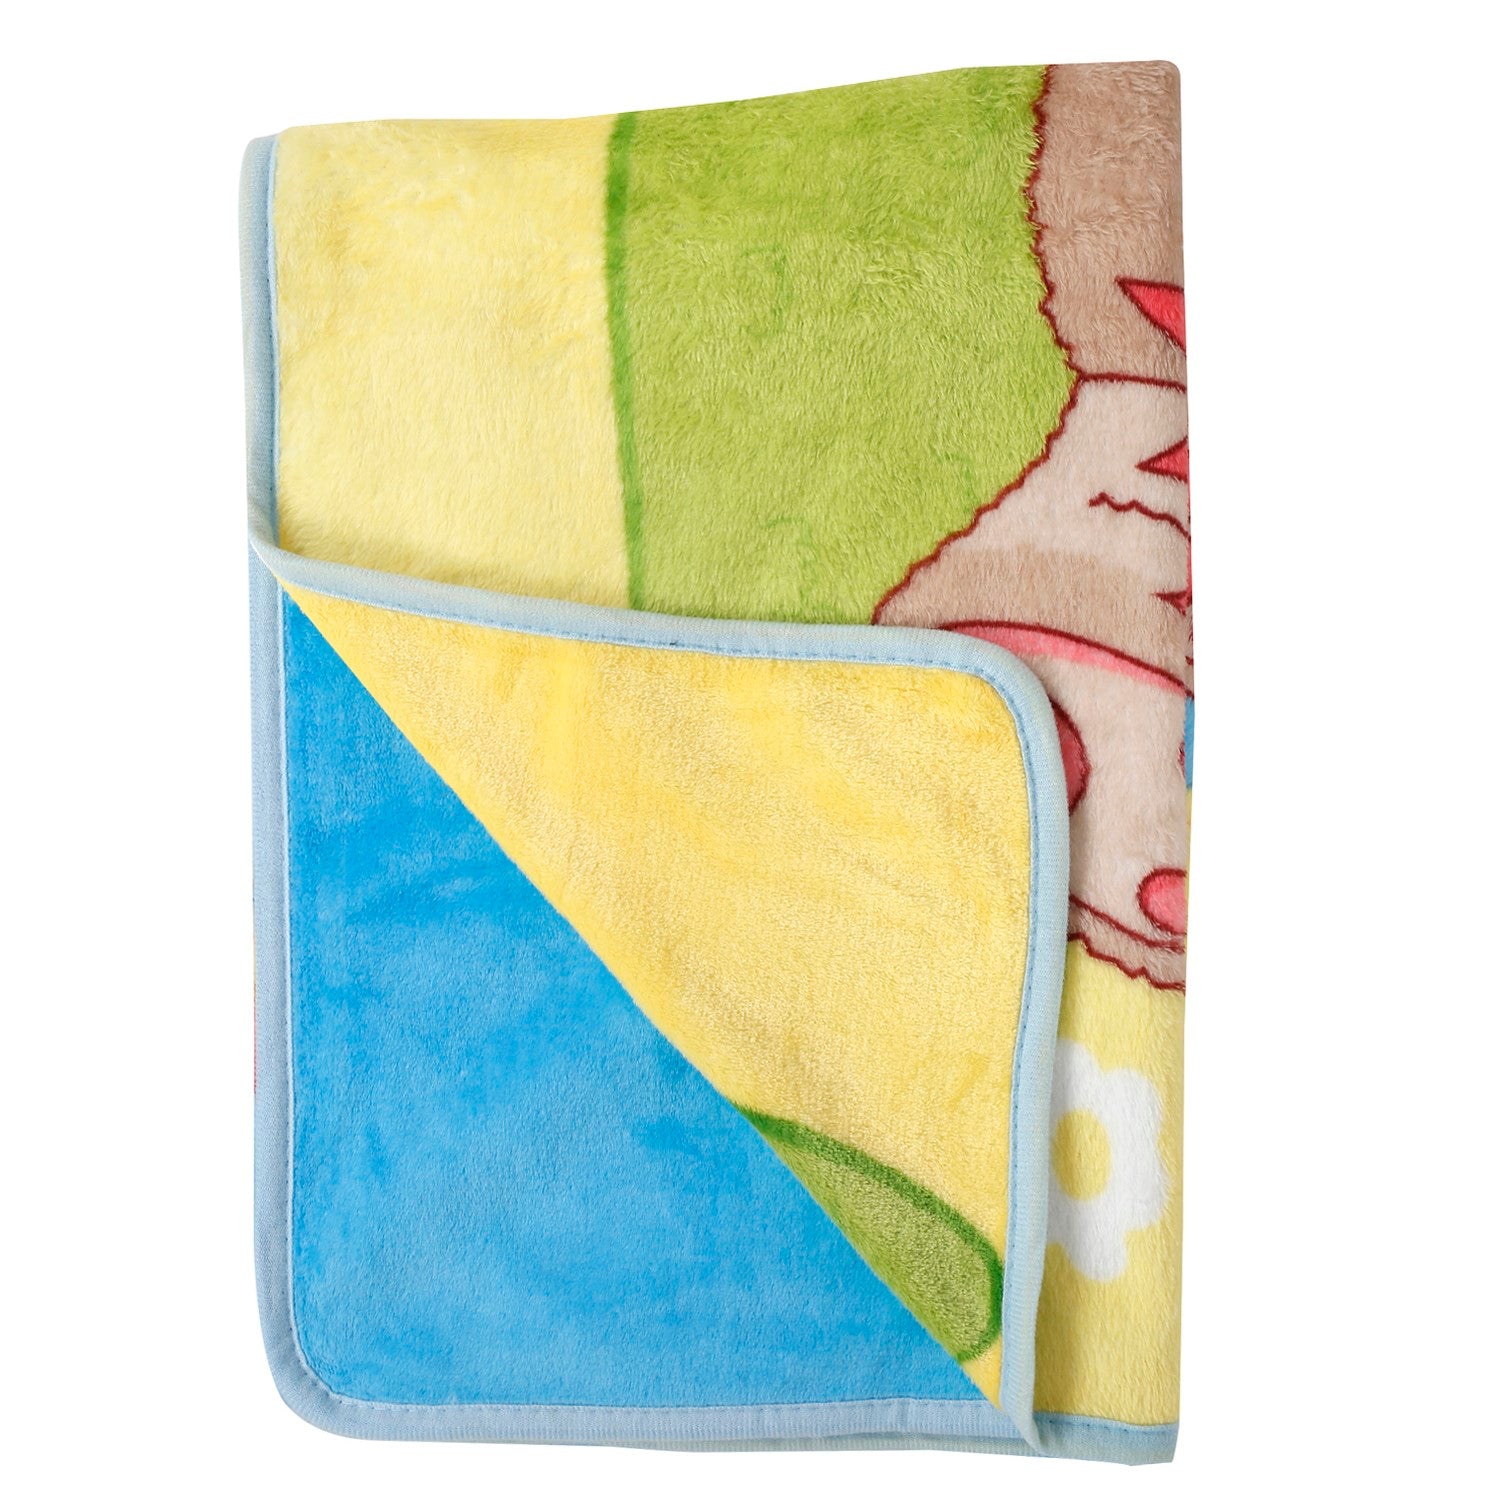 Baby Moo Love You Star Blue And Yellow One Ply Blanket